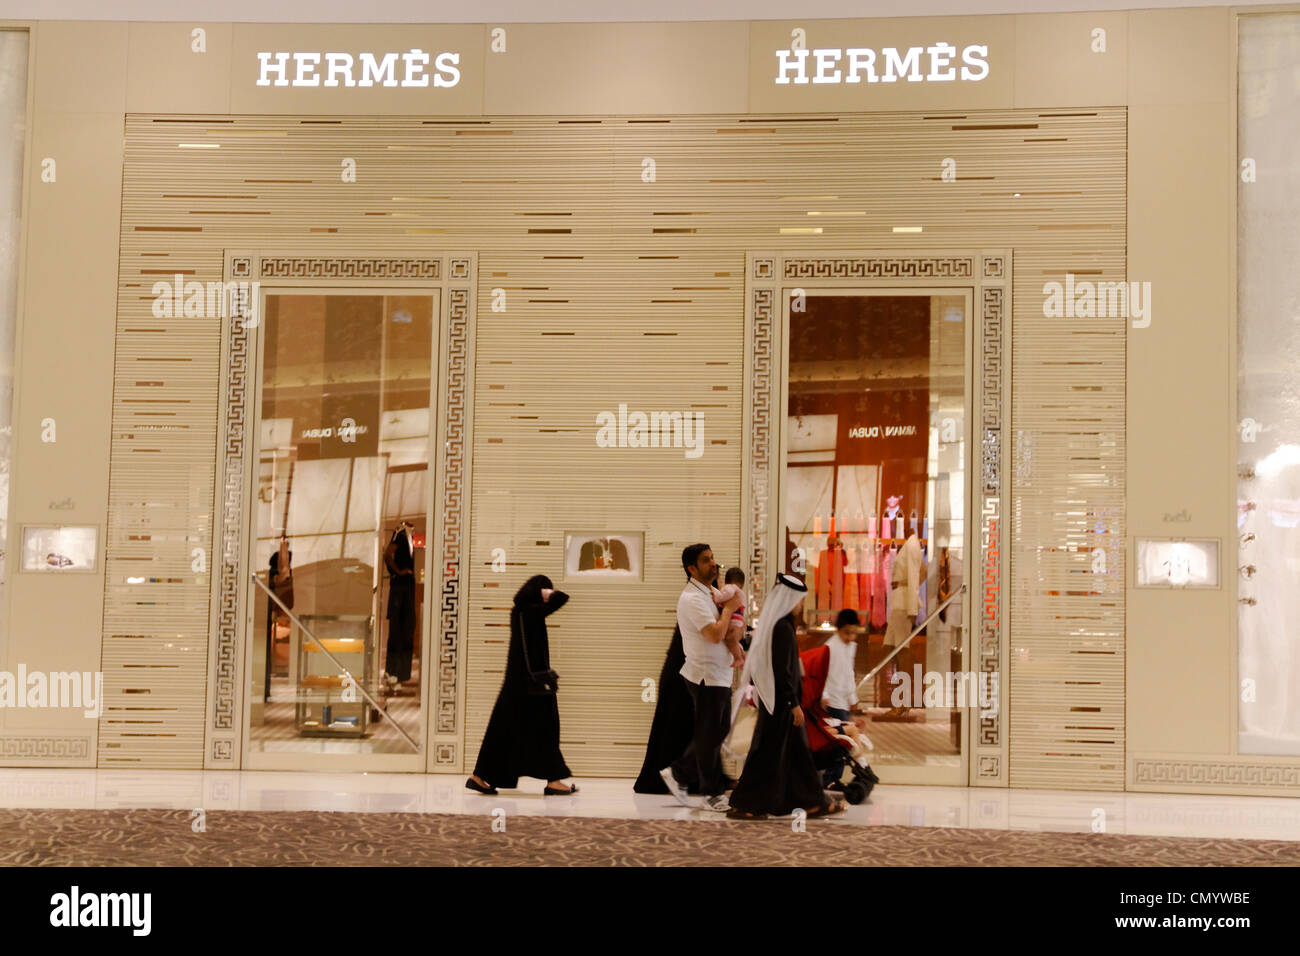 hermes mall of the emirates